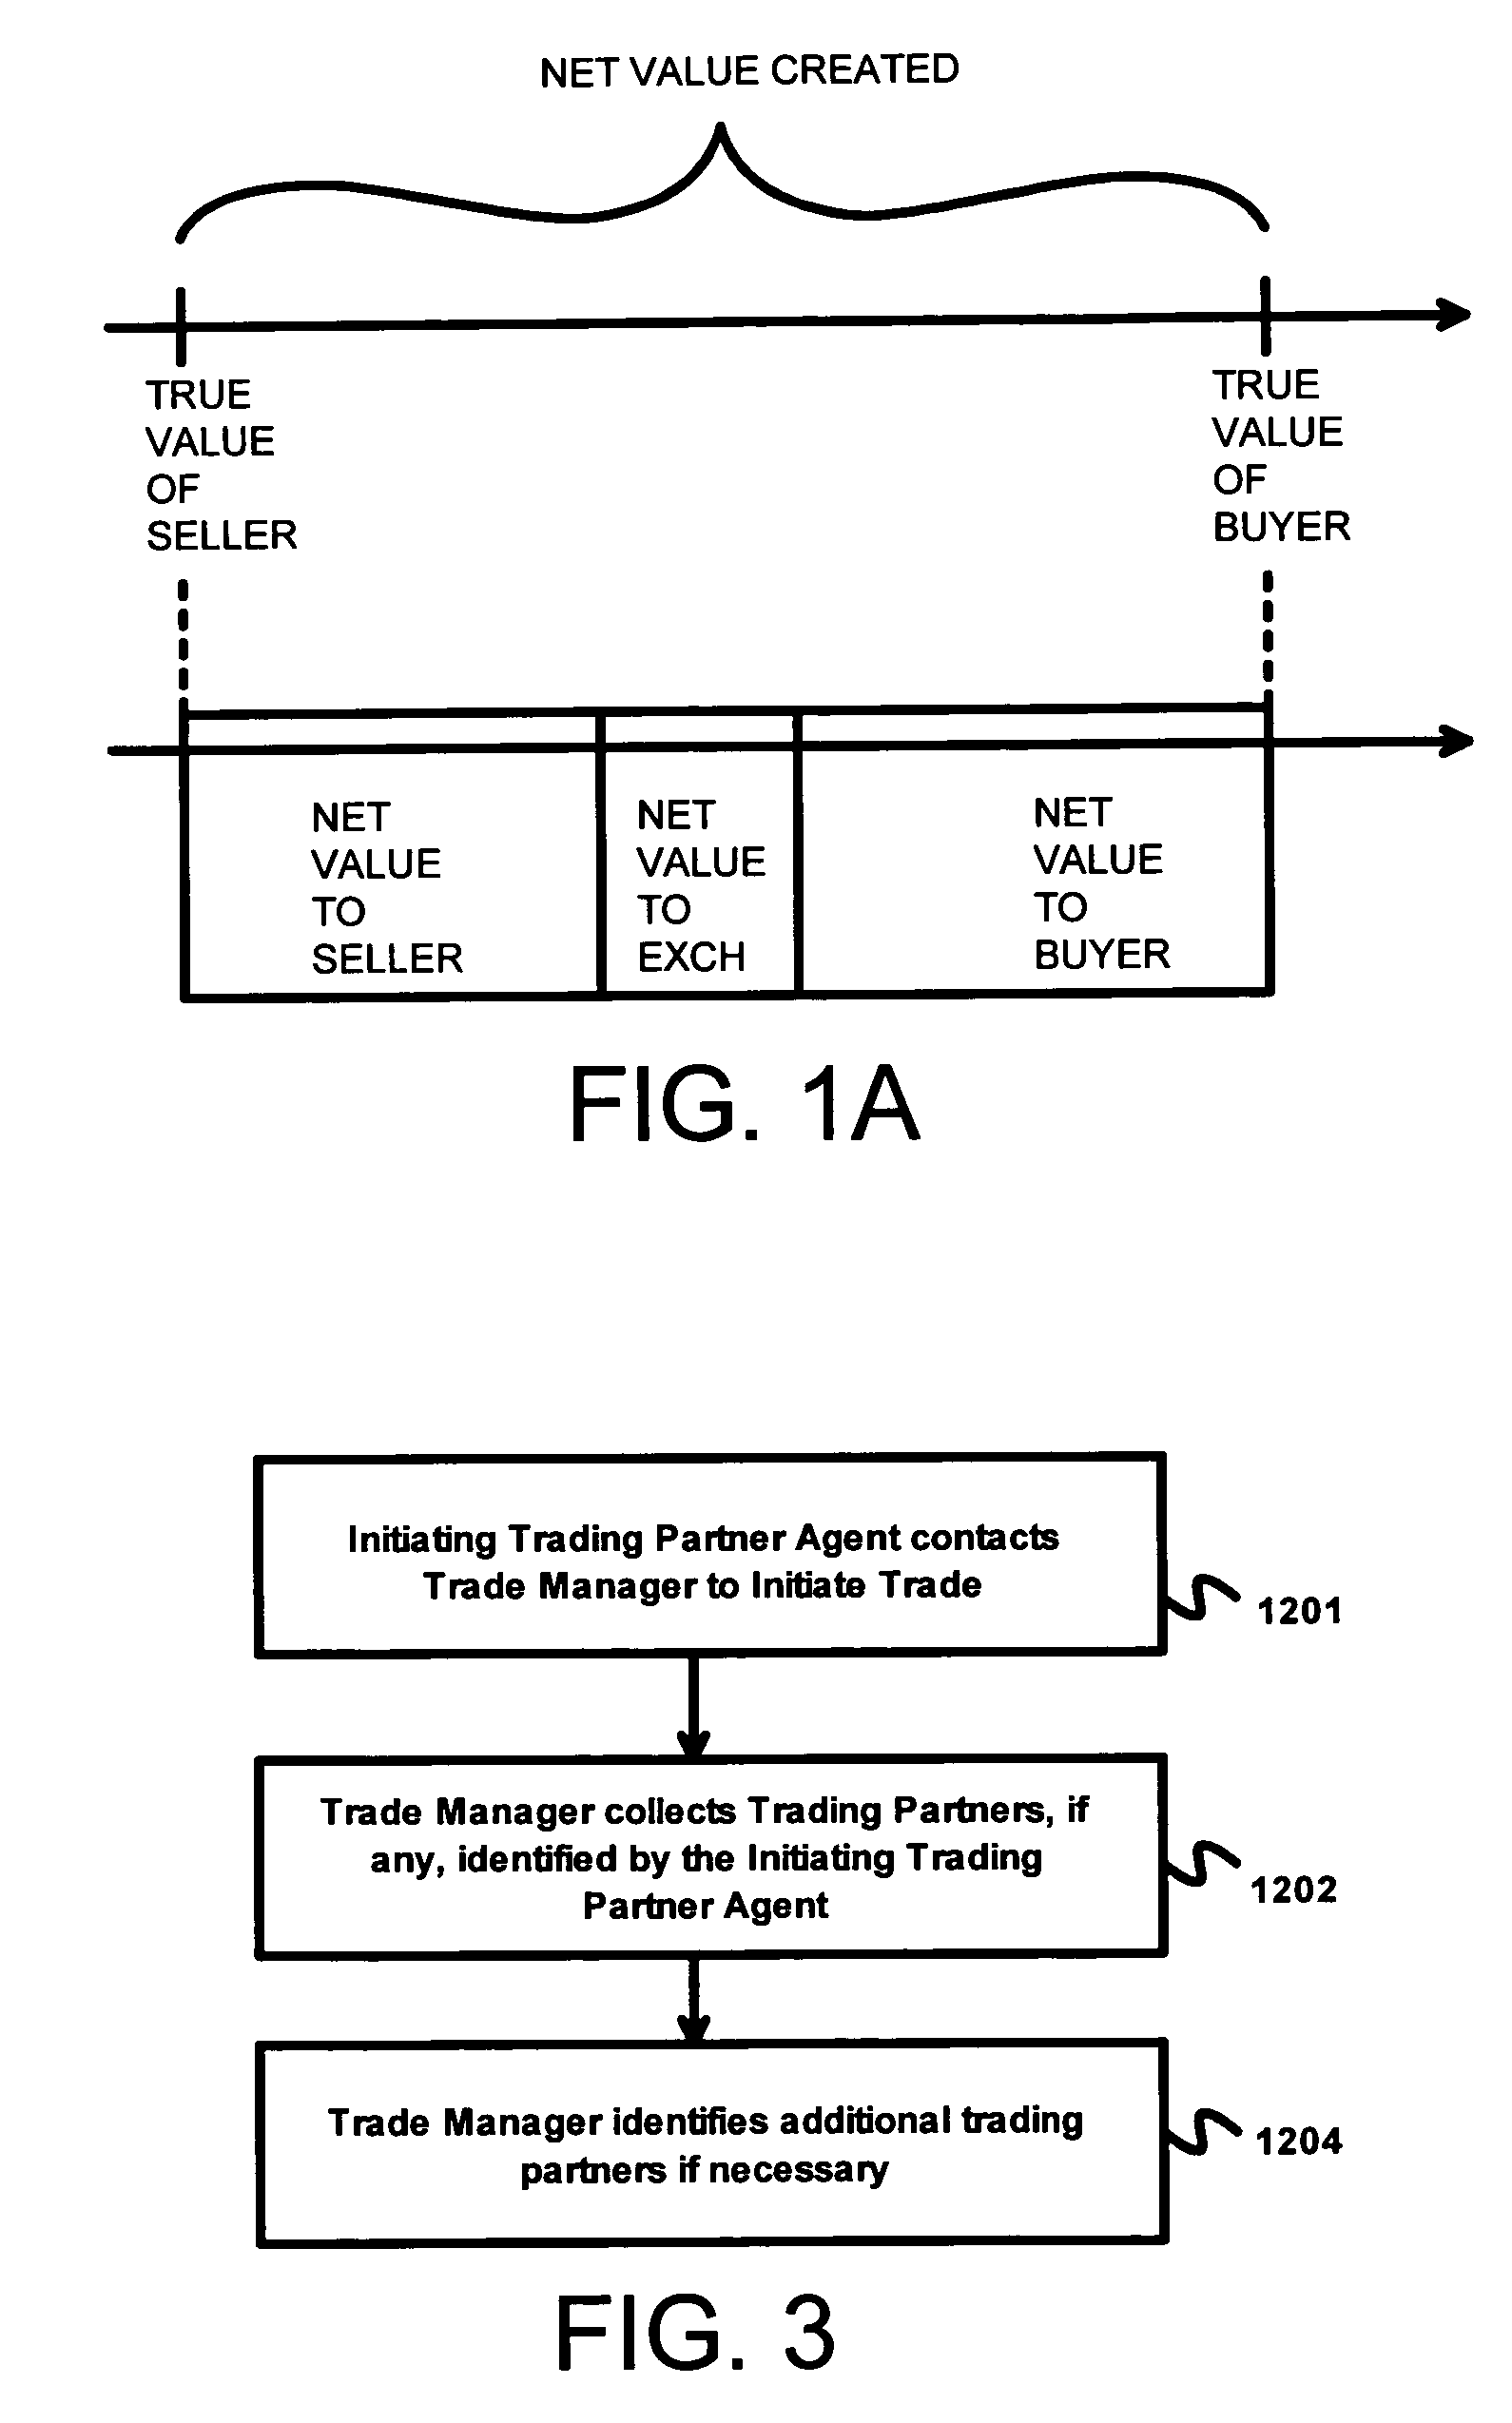 Net-value creation and allocation in an electronic trading system